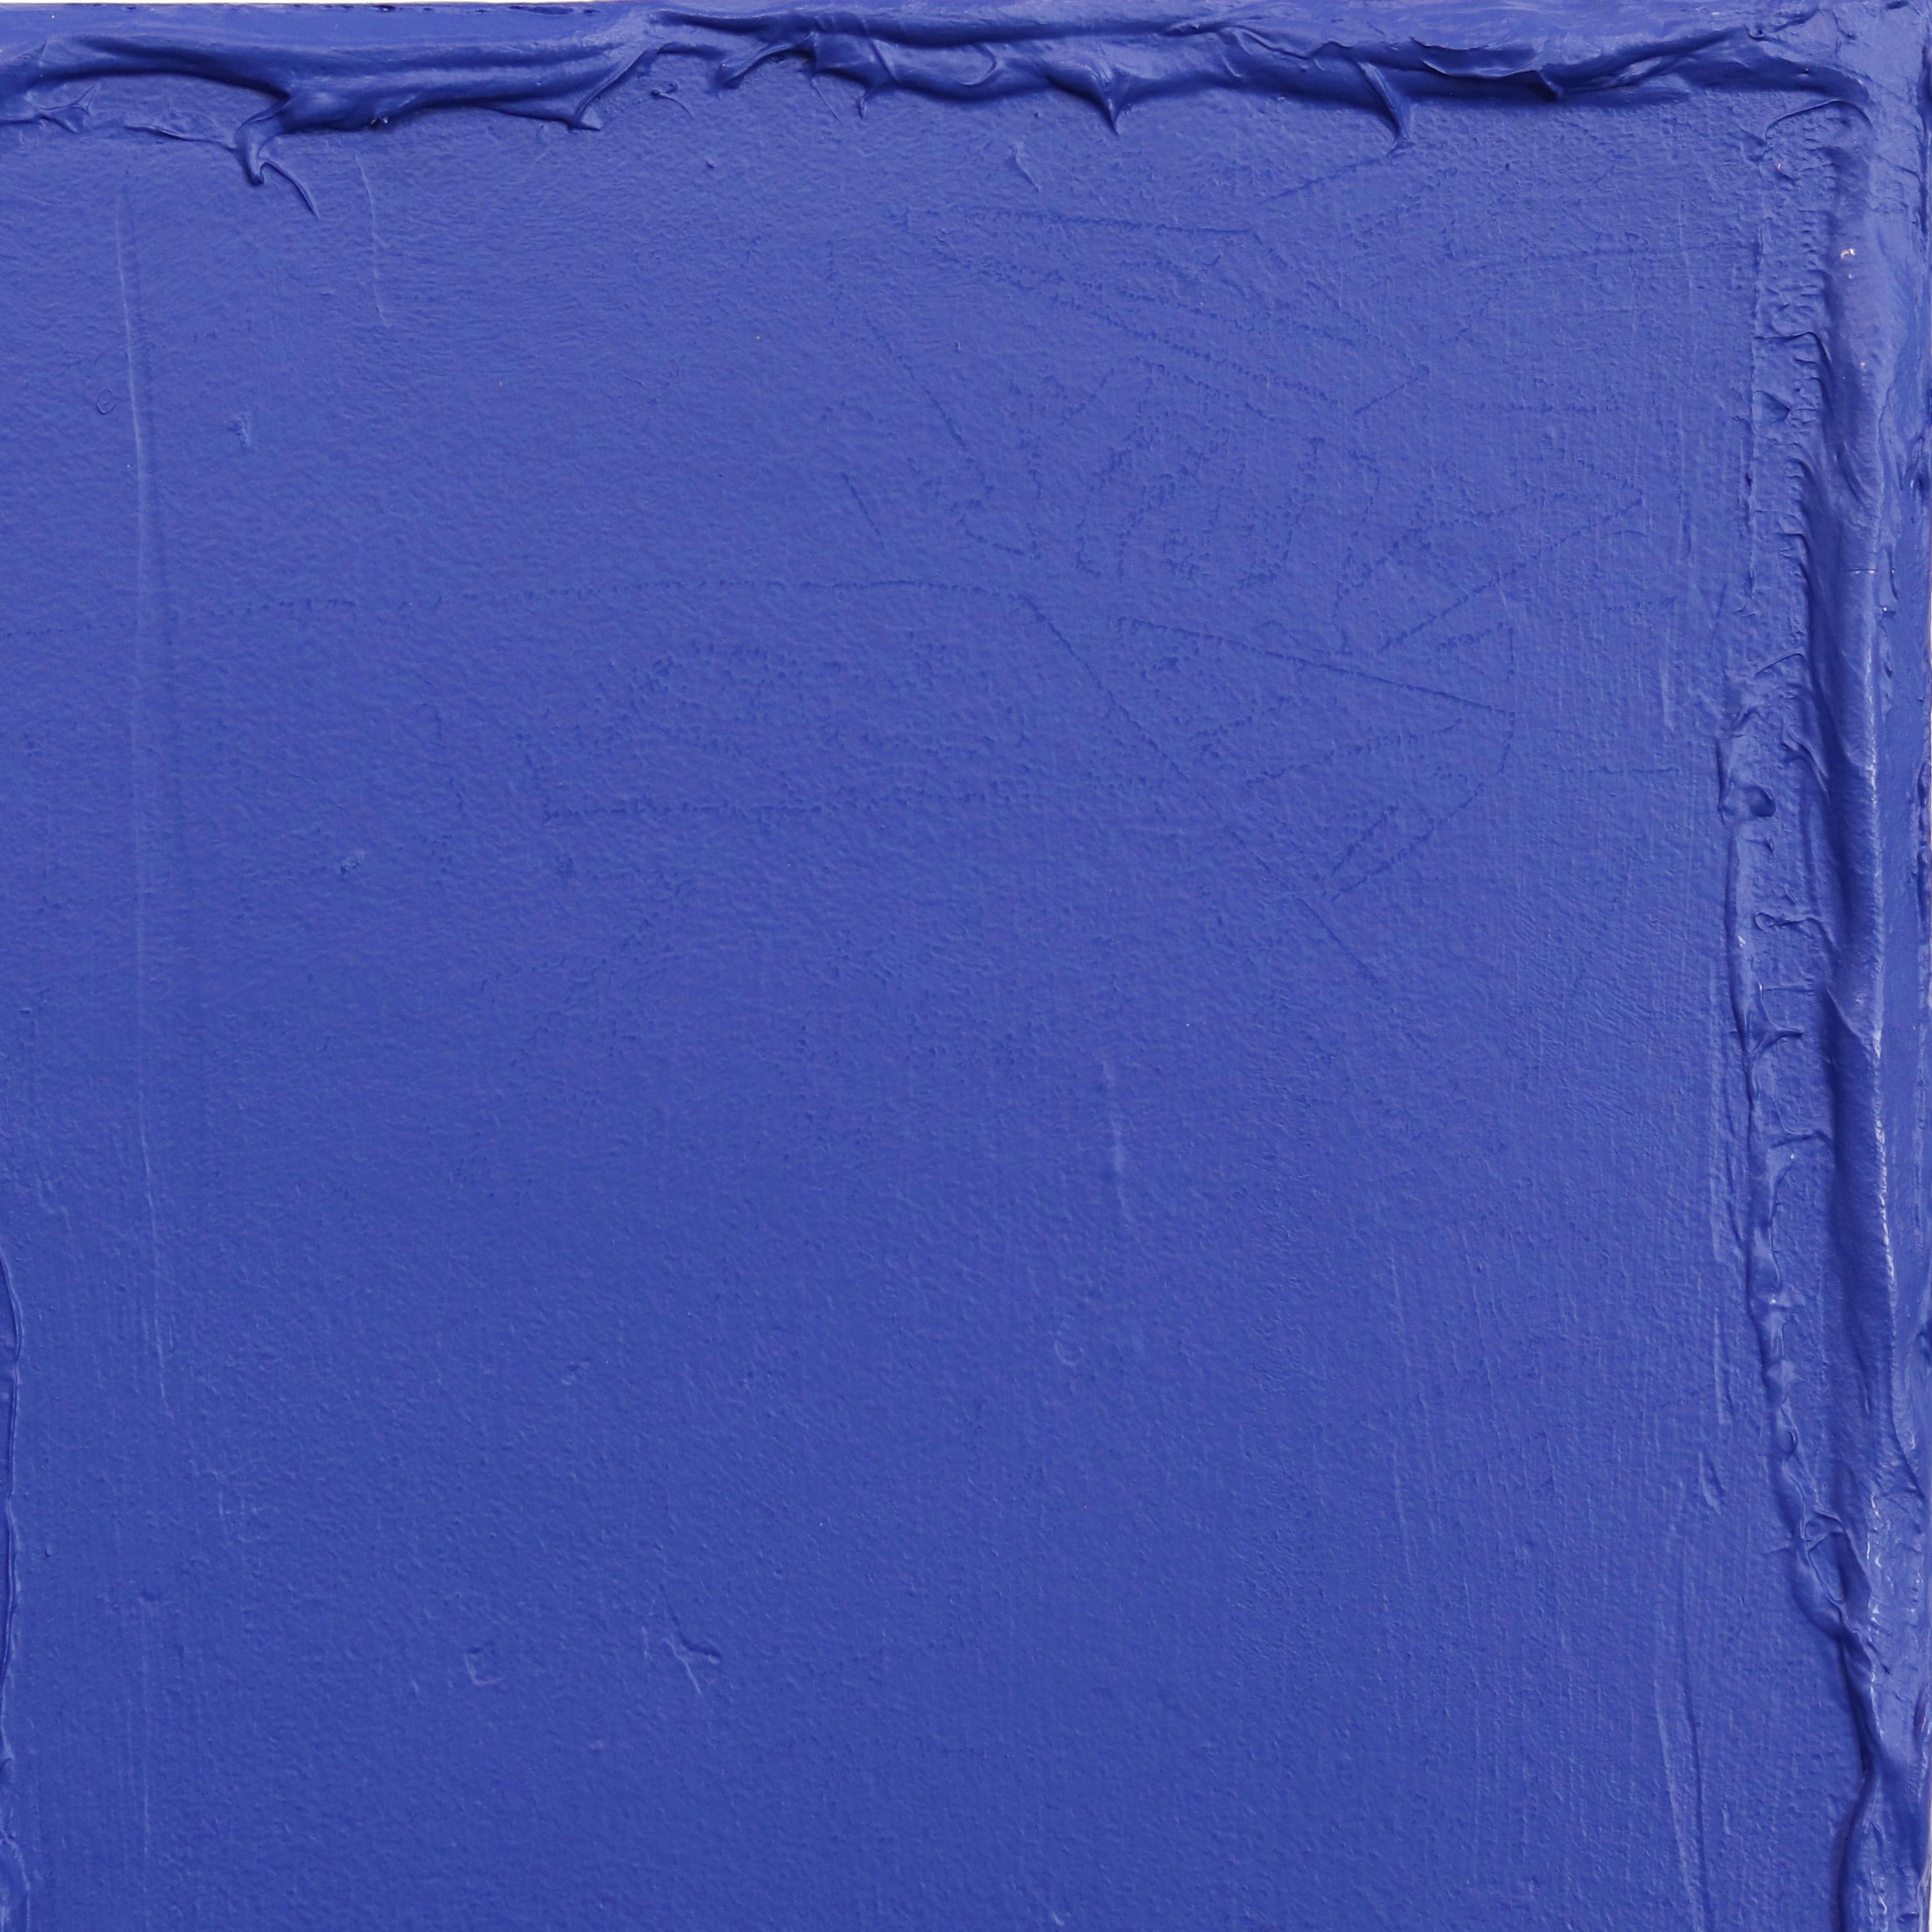 Sapphire - Blue Textural Abstract Minimalist Artwork on Canvas For Sale 3